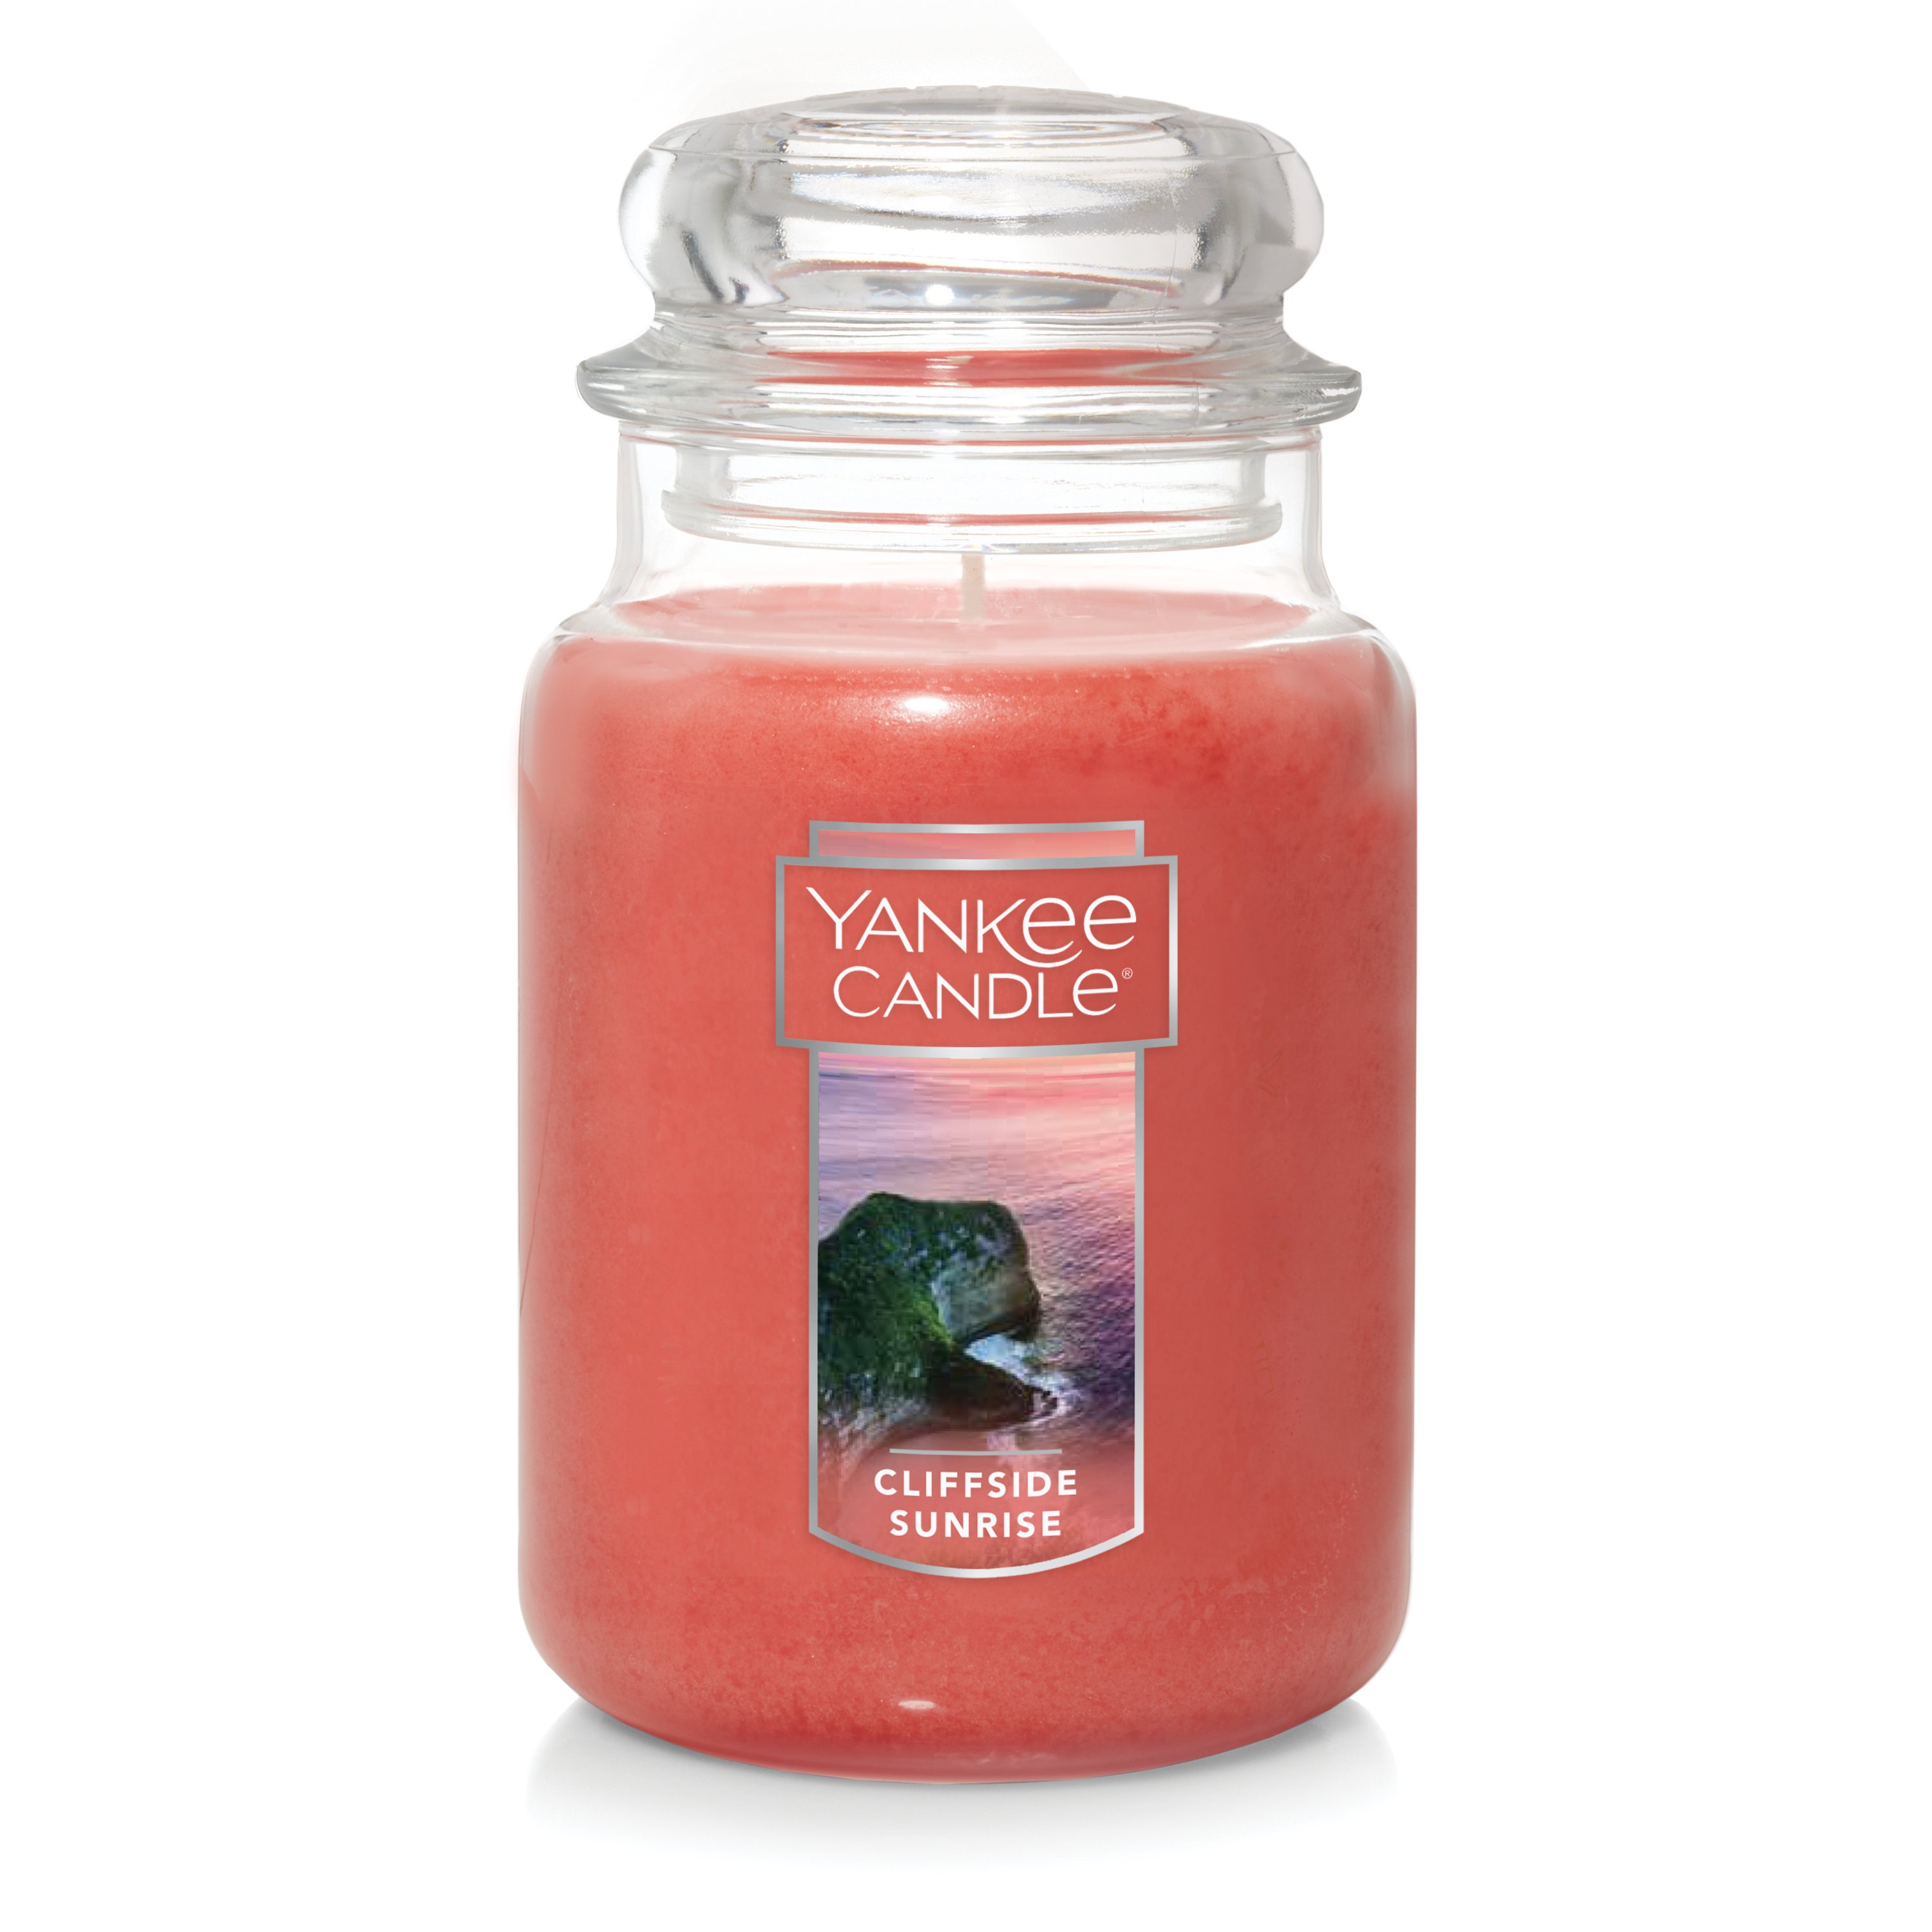 Yankee Candle Review: Is it really as good as its reputation? - Reviewed